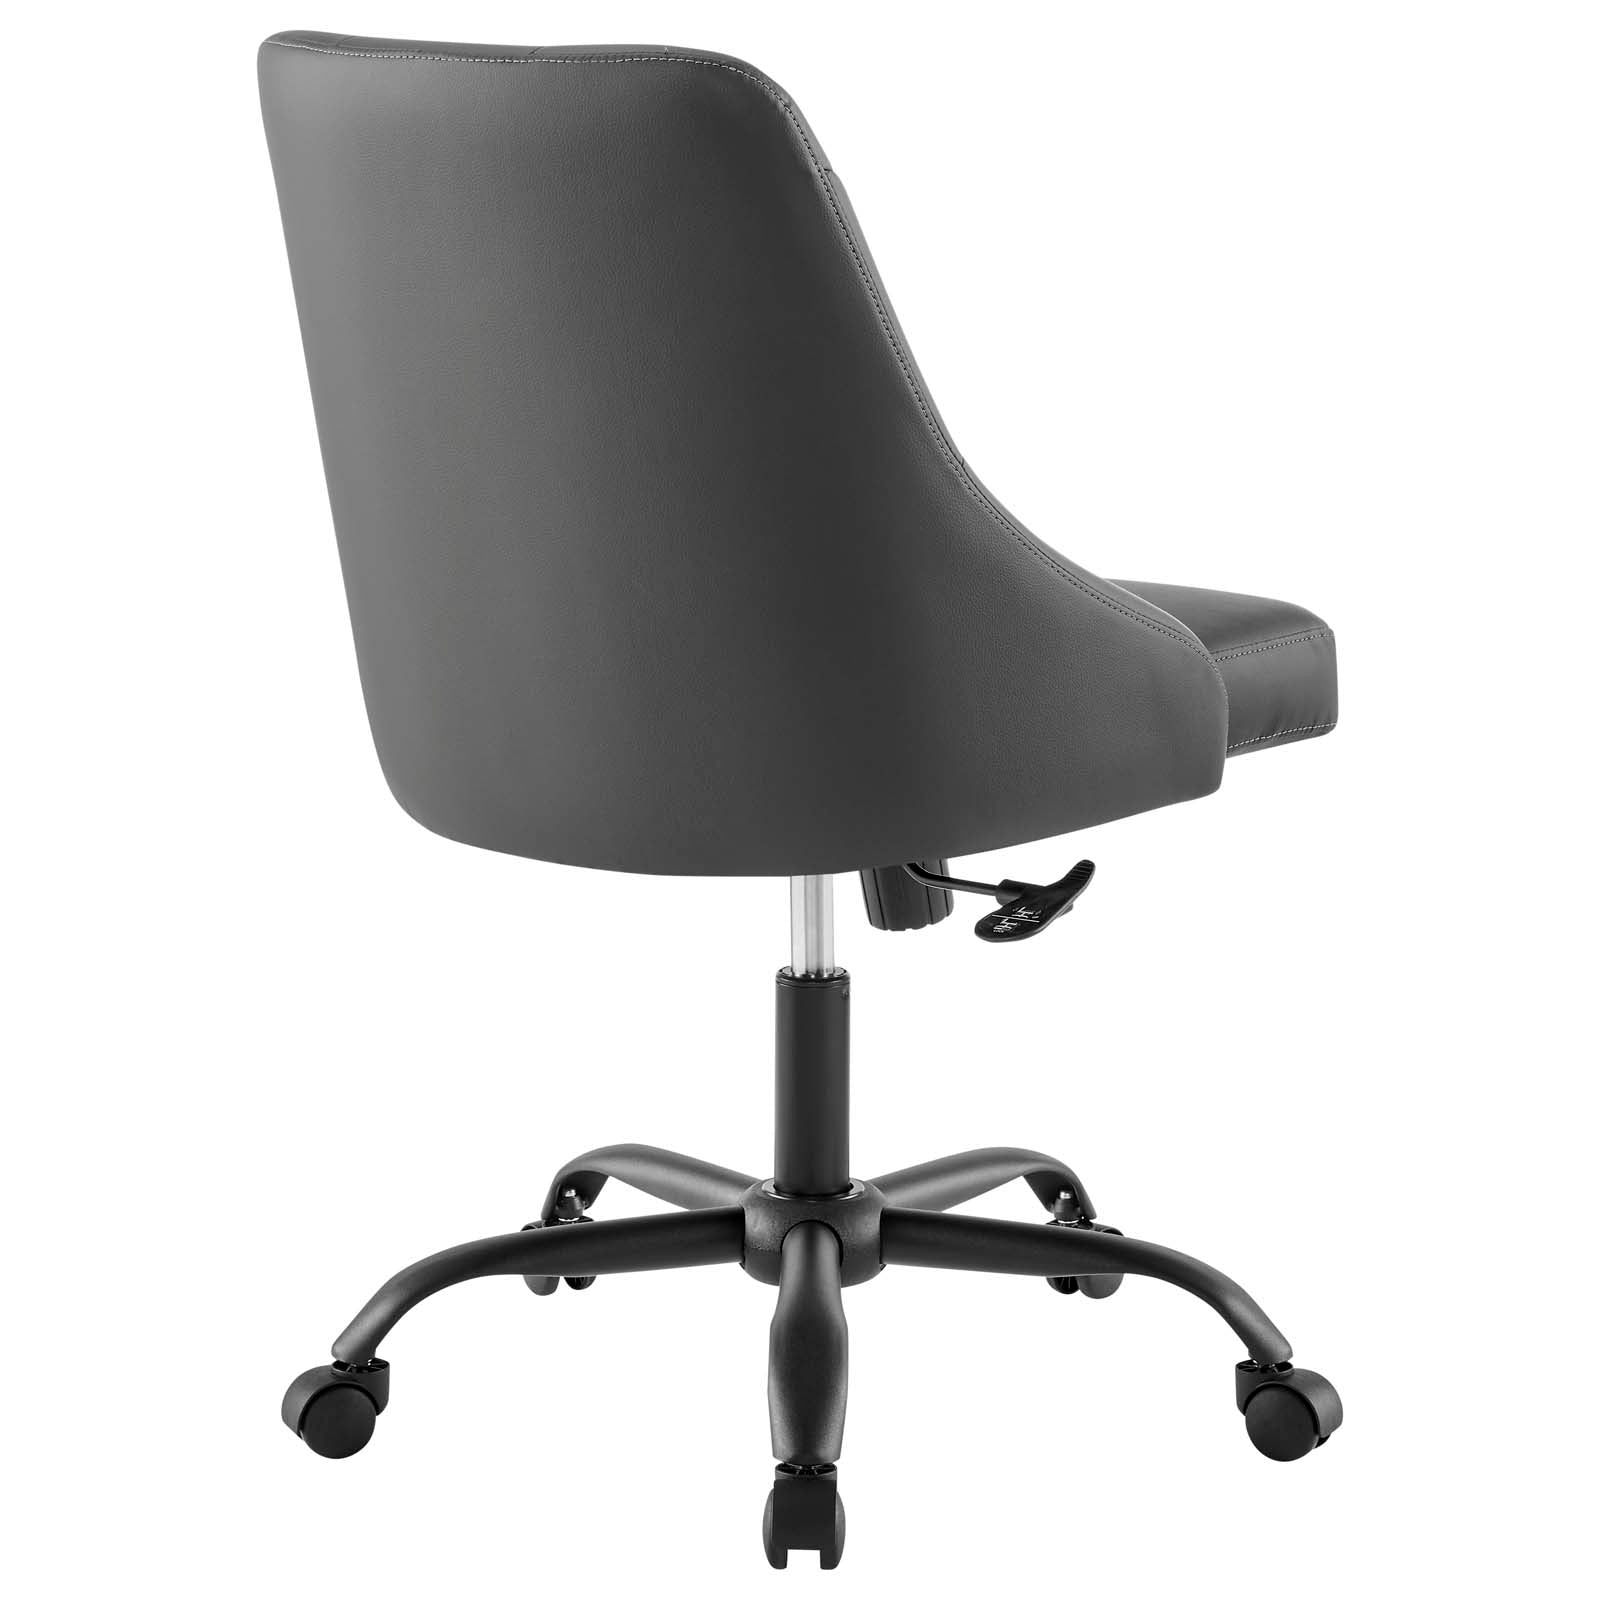 Modway Task Chairs - Distinct Tufted Swivel Vegan Leather Office Chair Black Gray